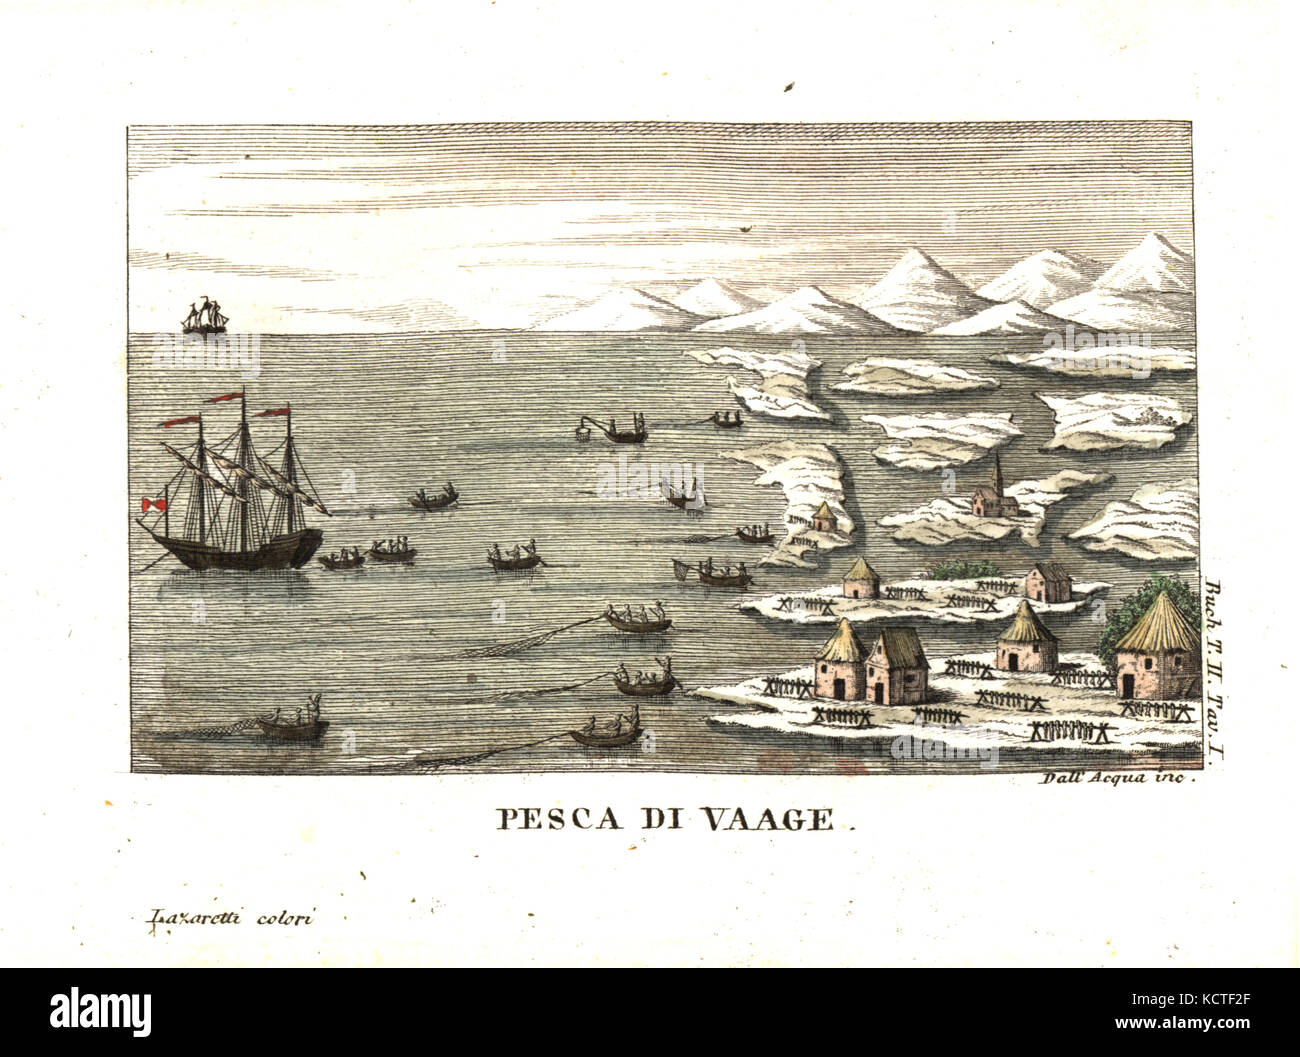 Fishing boats in Vaage, Norway. In February and March, 300 boats manned by 20,000 fishermen assemble here. Illustration from Leopold von Buch’s Travels Through Norway and Lapland, 1813. Copperplate engraving by Dell'Acqua handcoloured by Lazaretti from Giovanni Battista Sonzogno’s Collection of the Most Interesting Voyages (Raccolta de Viaggi Piu Interessanti), Milan, 1815-1817. Stock Photo